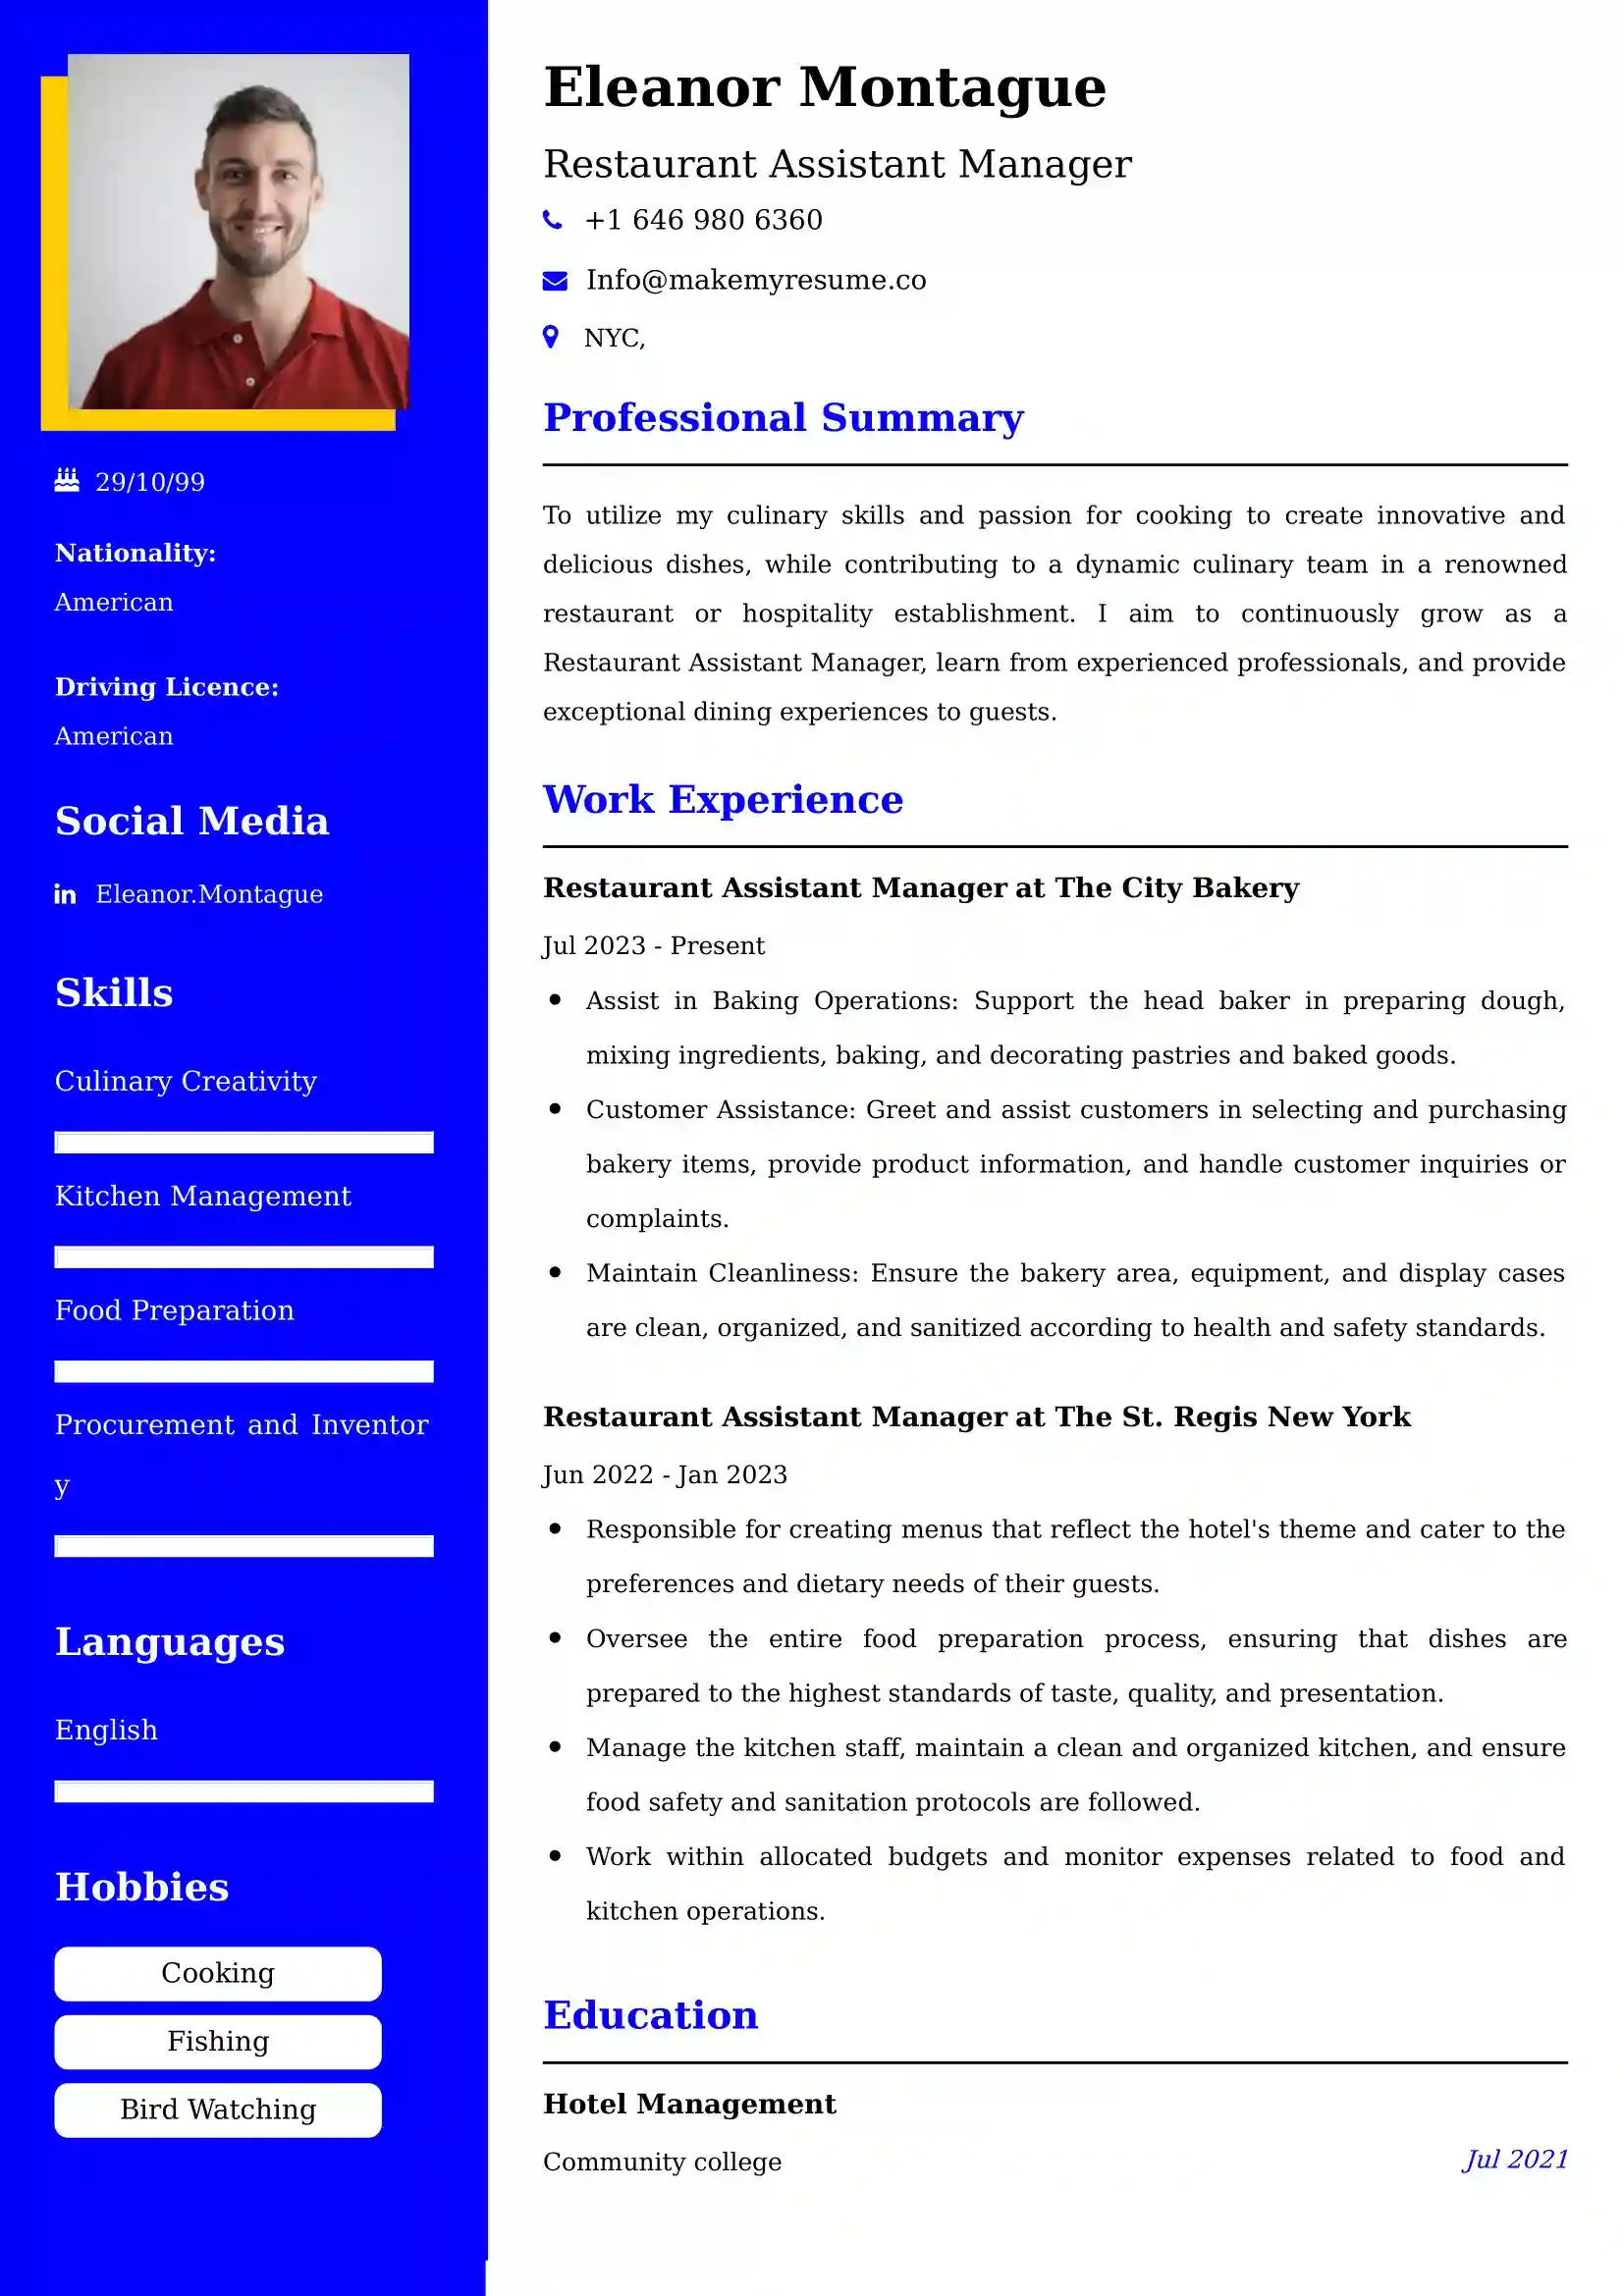 Restaurant Assistant Manager Resume Examples - Brazilian Format, Latest Template